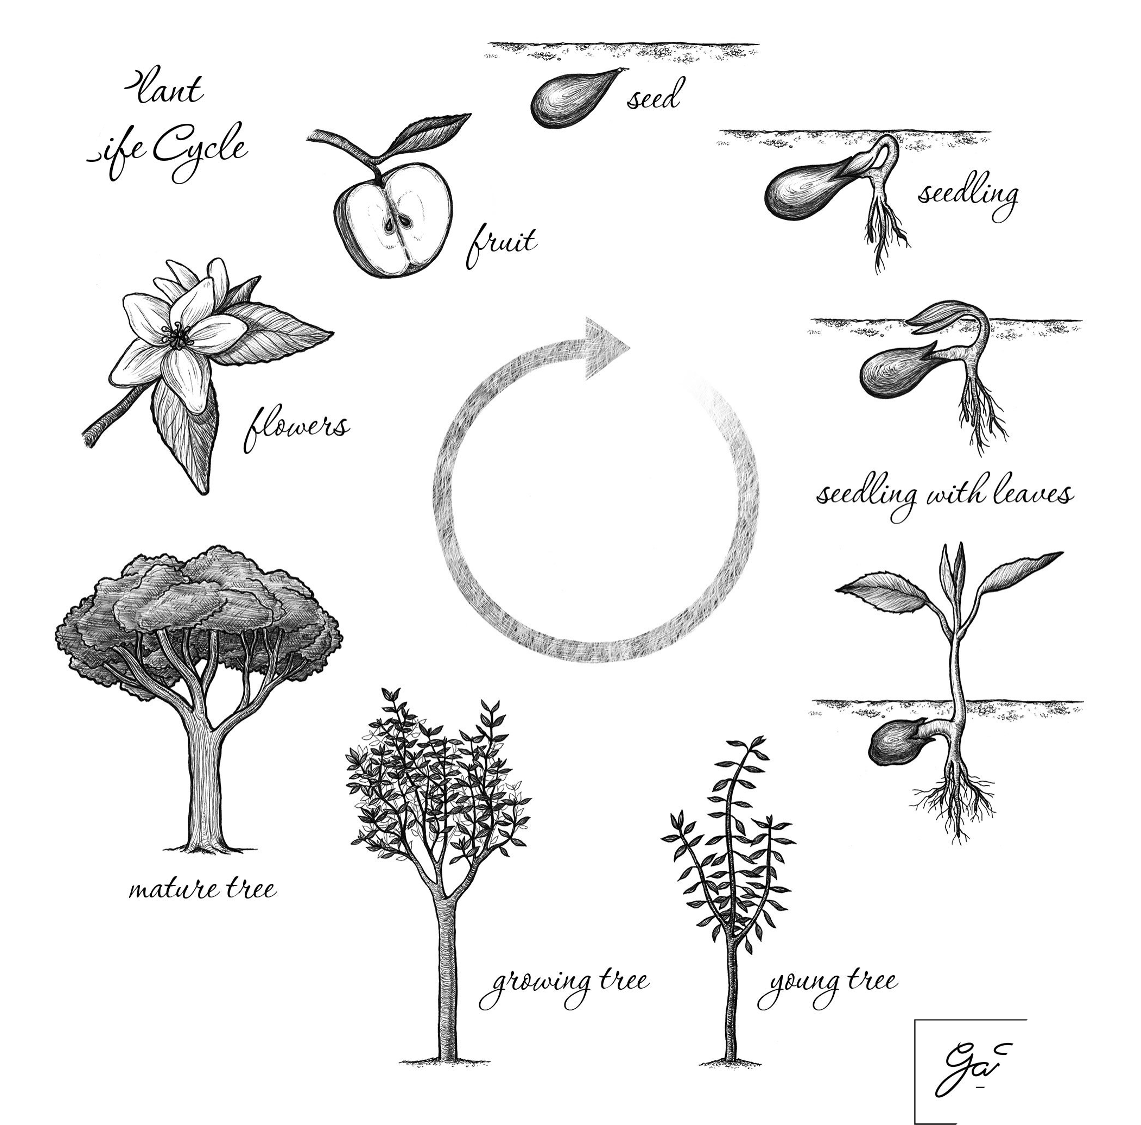 Diagram showing perennial life cycle of a plant